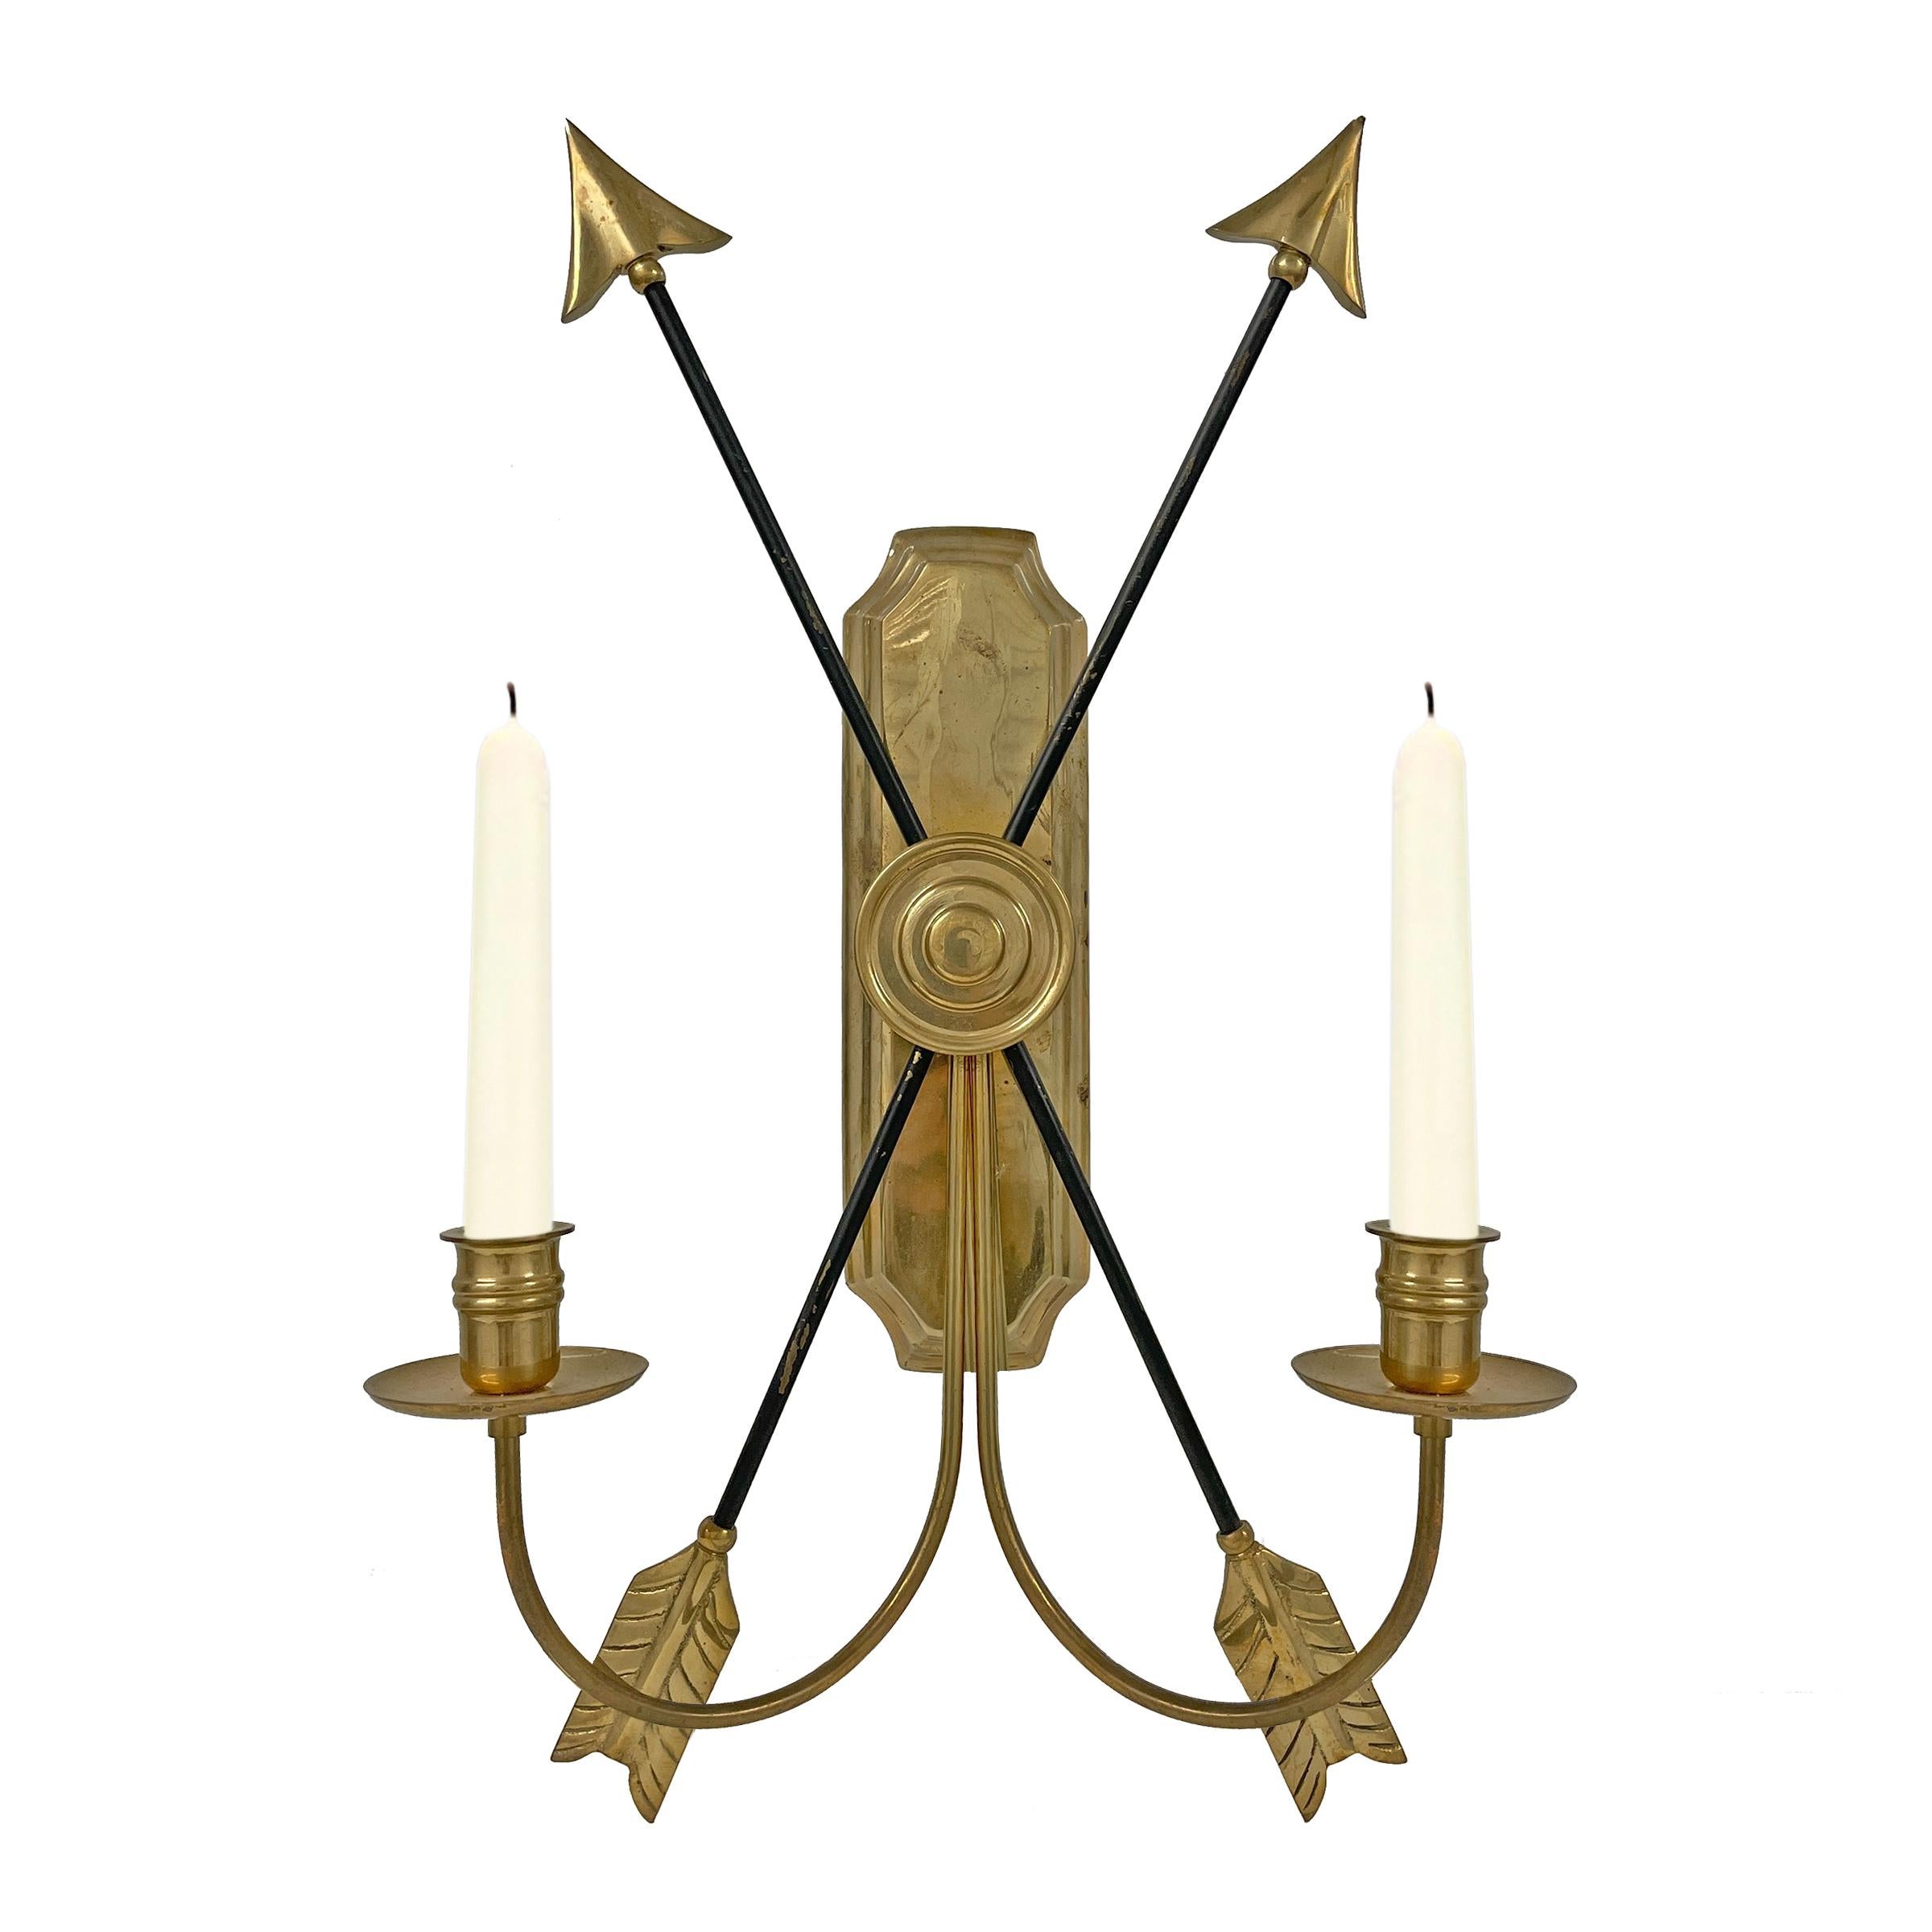 American Pair of Mid-20th Century Empire-Style Candle Sconces